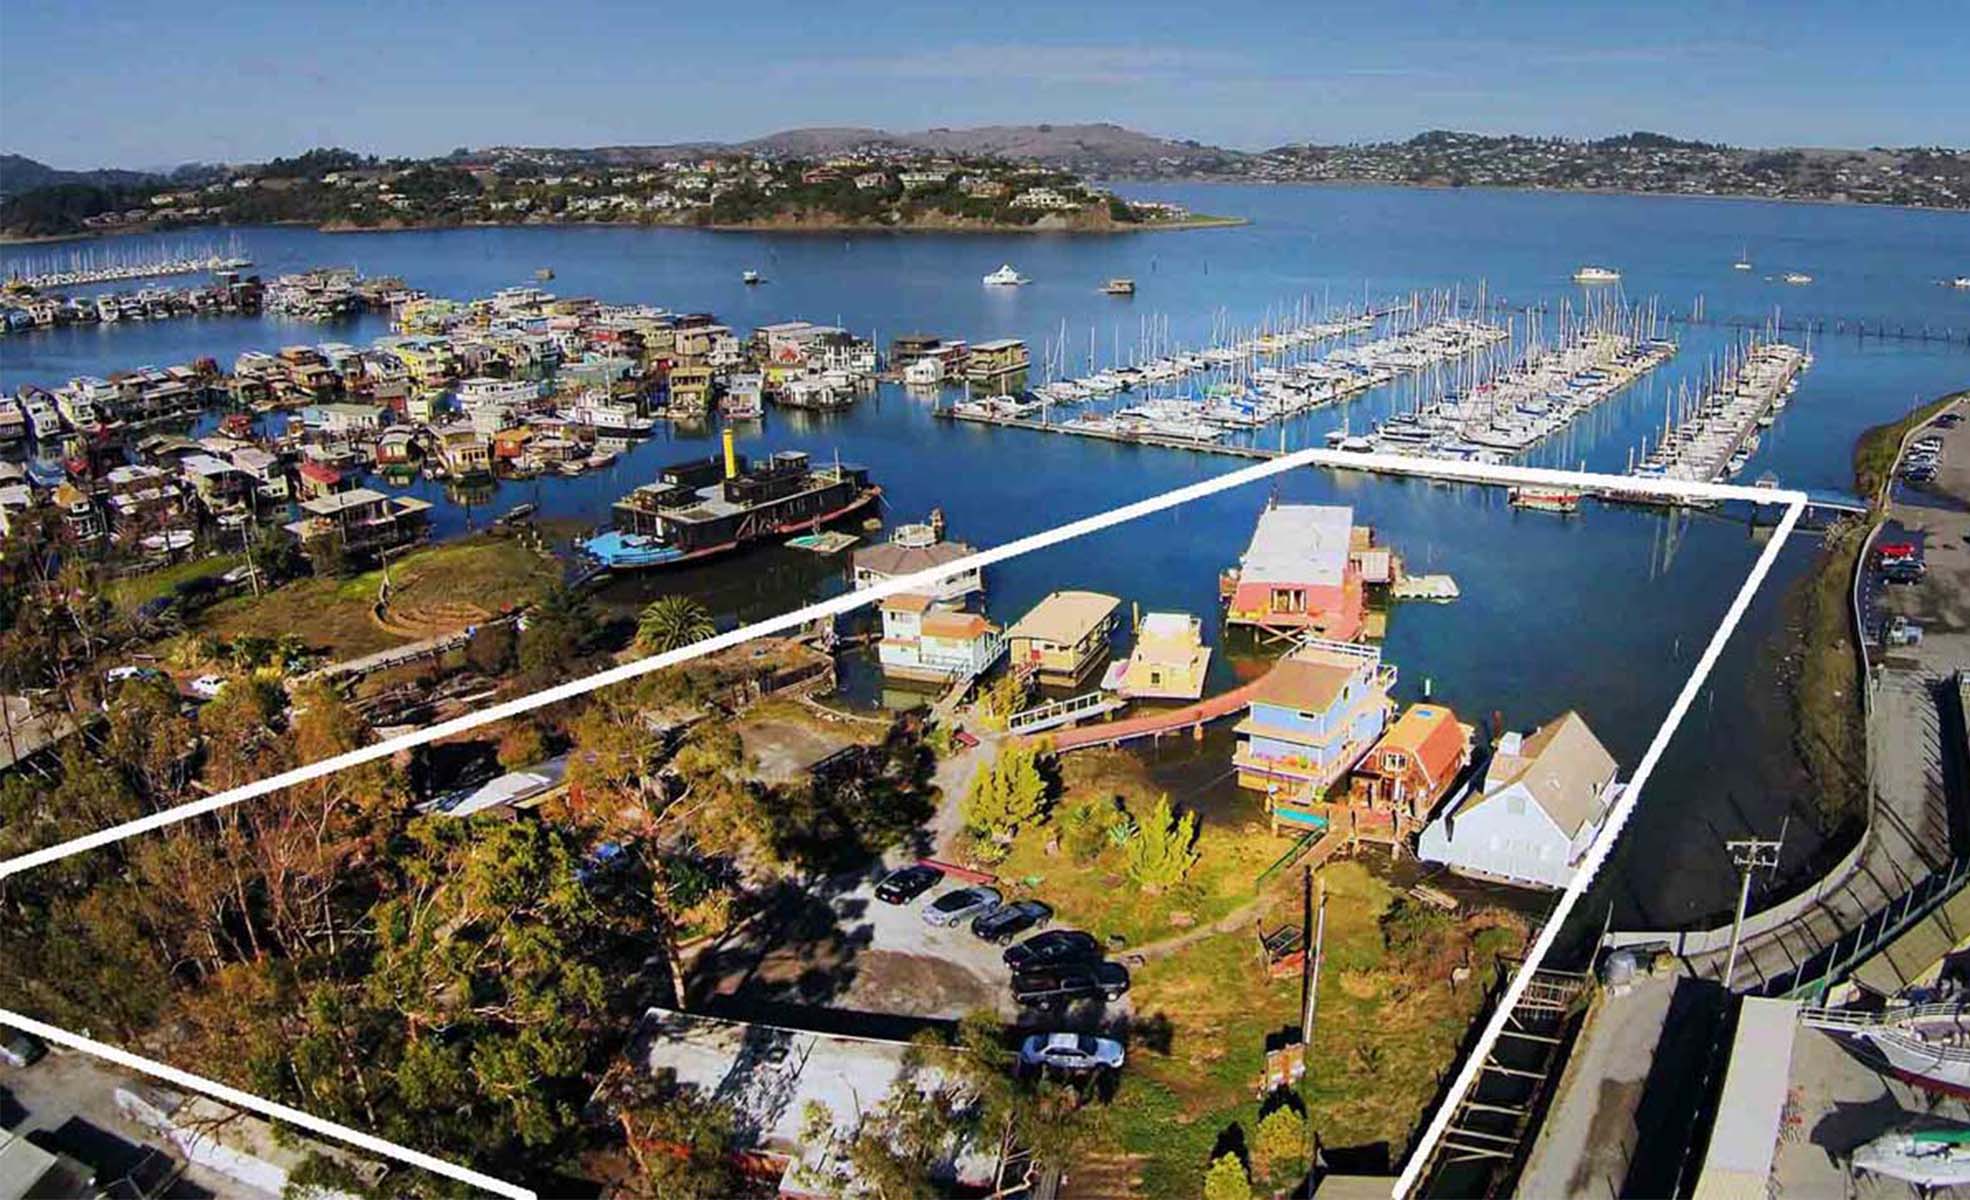 BayHaven Harbor, commonly referred to as 60 Varda Landing, offers a rare opportunity to own an historic piece of the Sausalito waterfront while offering the unique combination of income from floating home harbor and development potential.